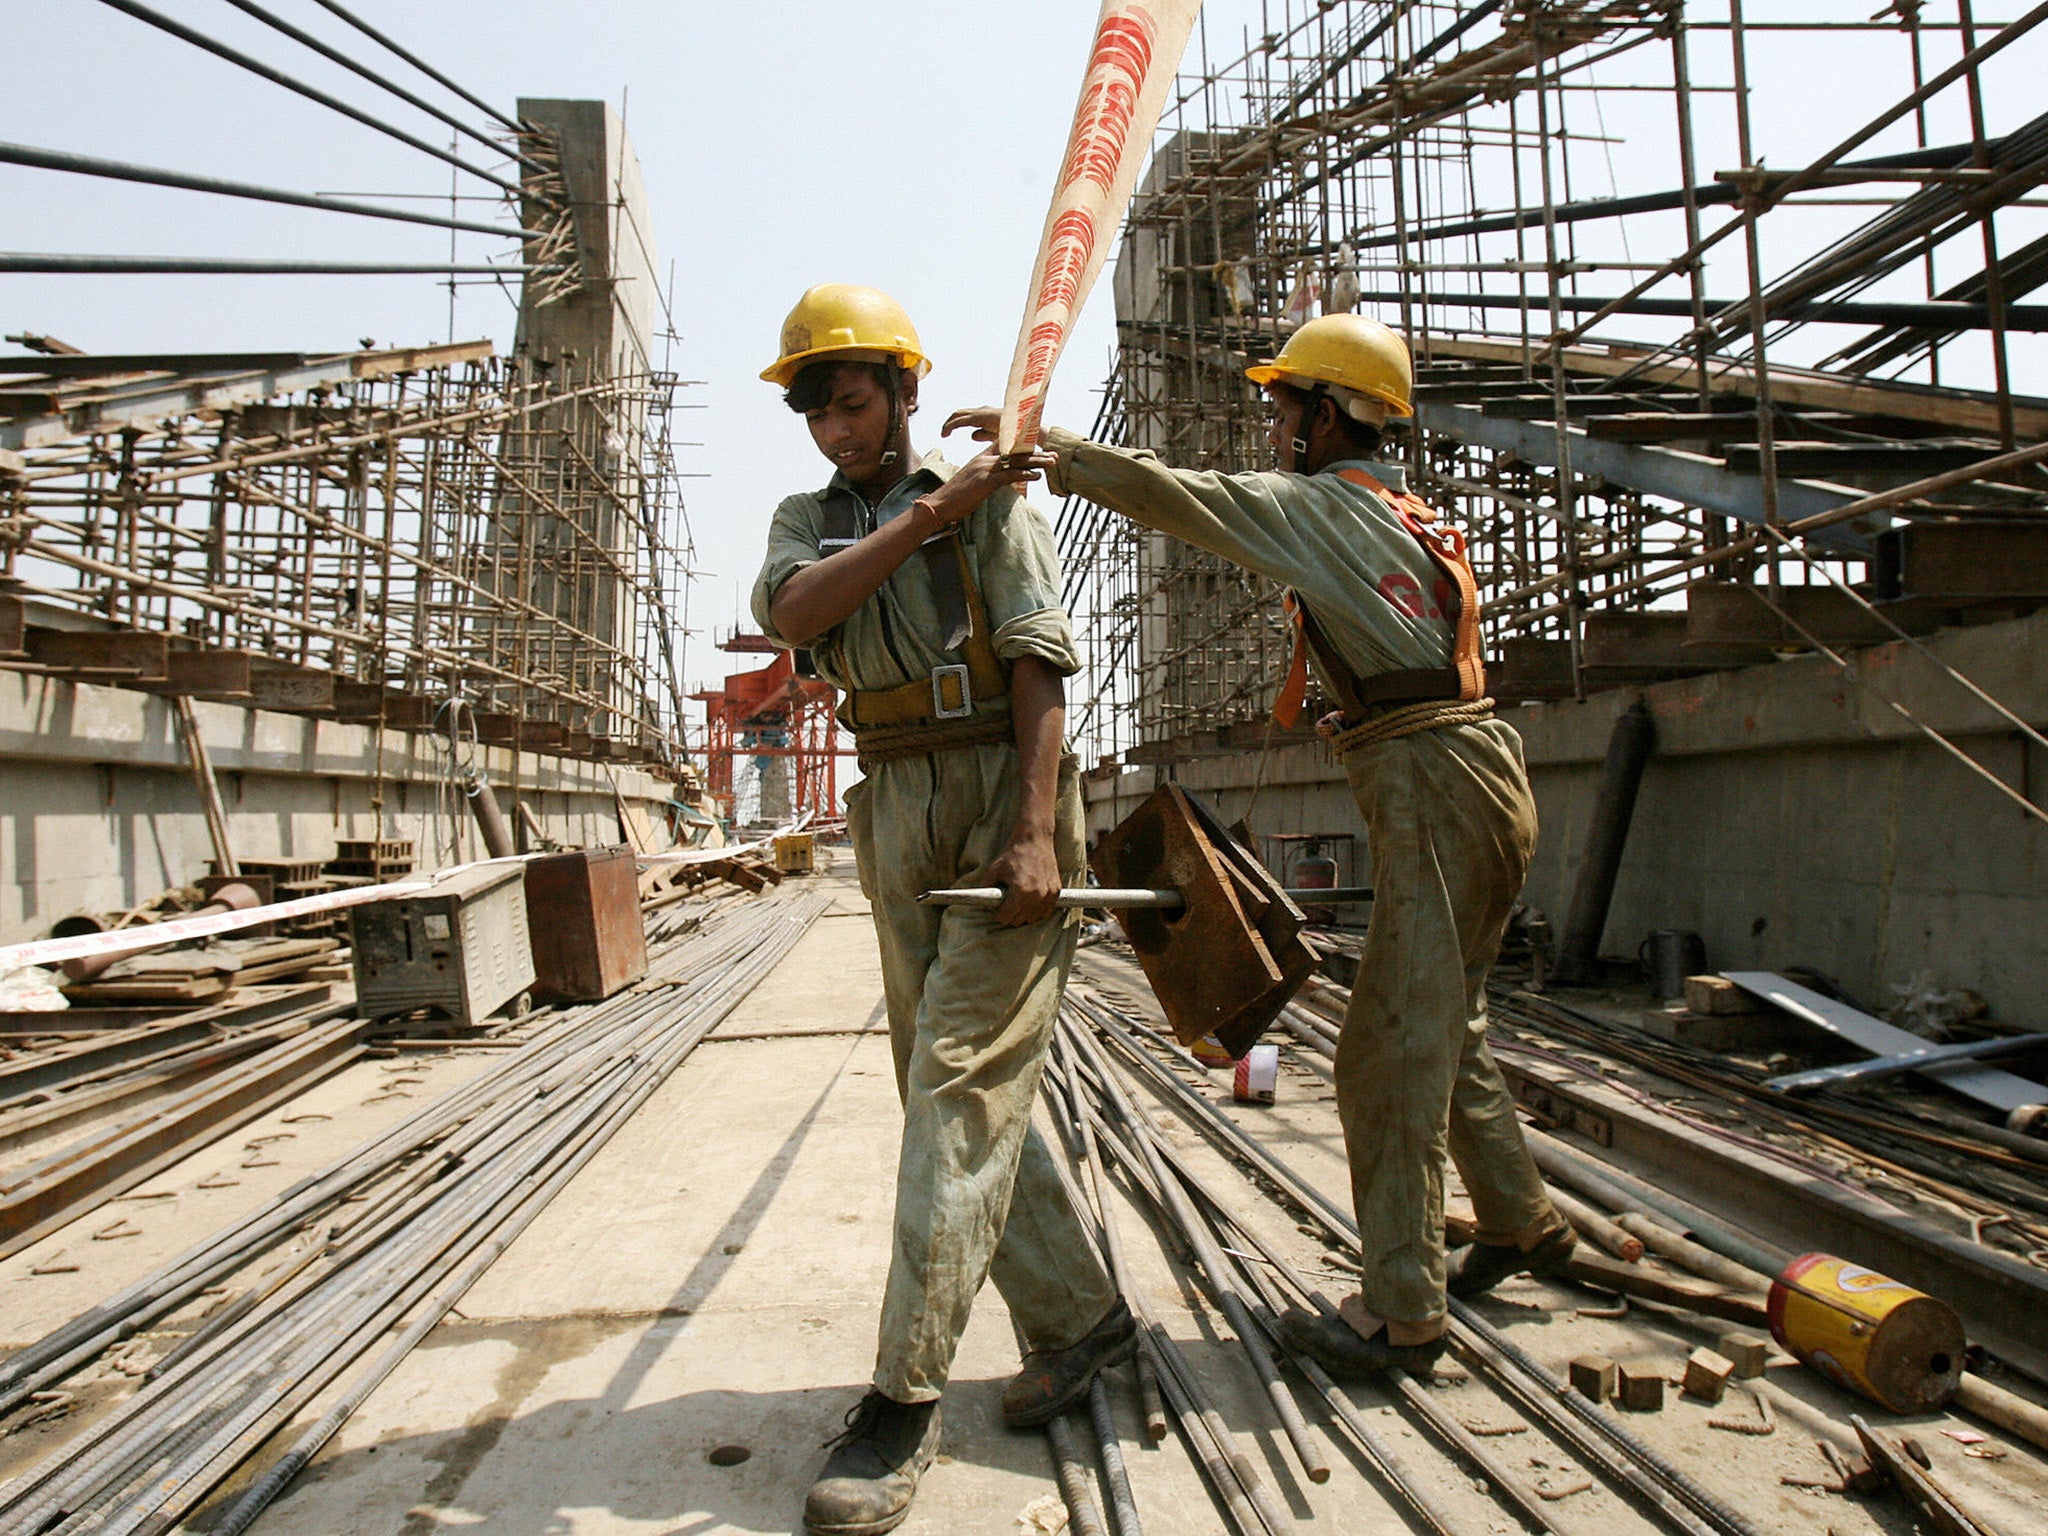 India is one of the fastest-growing major economies in the world, but unemployment has risen in nearly all states since 2011